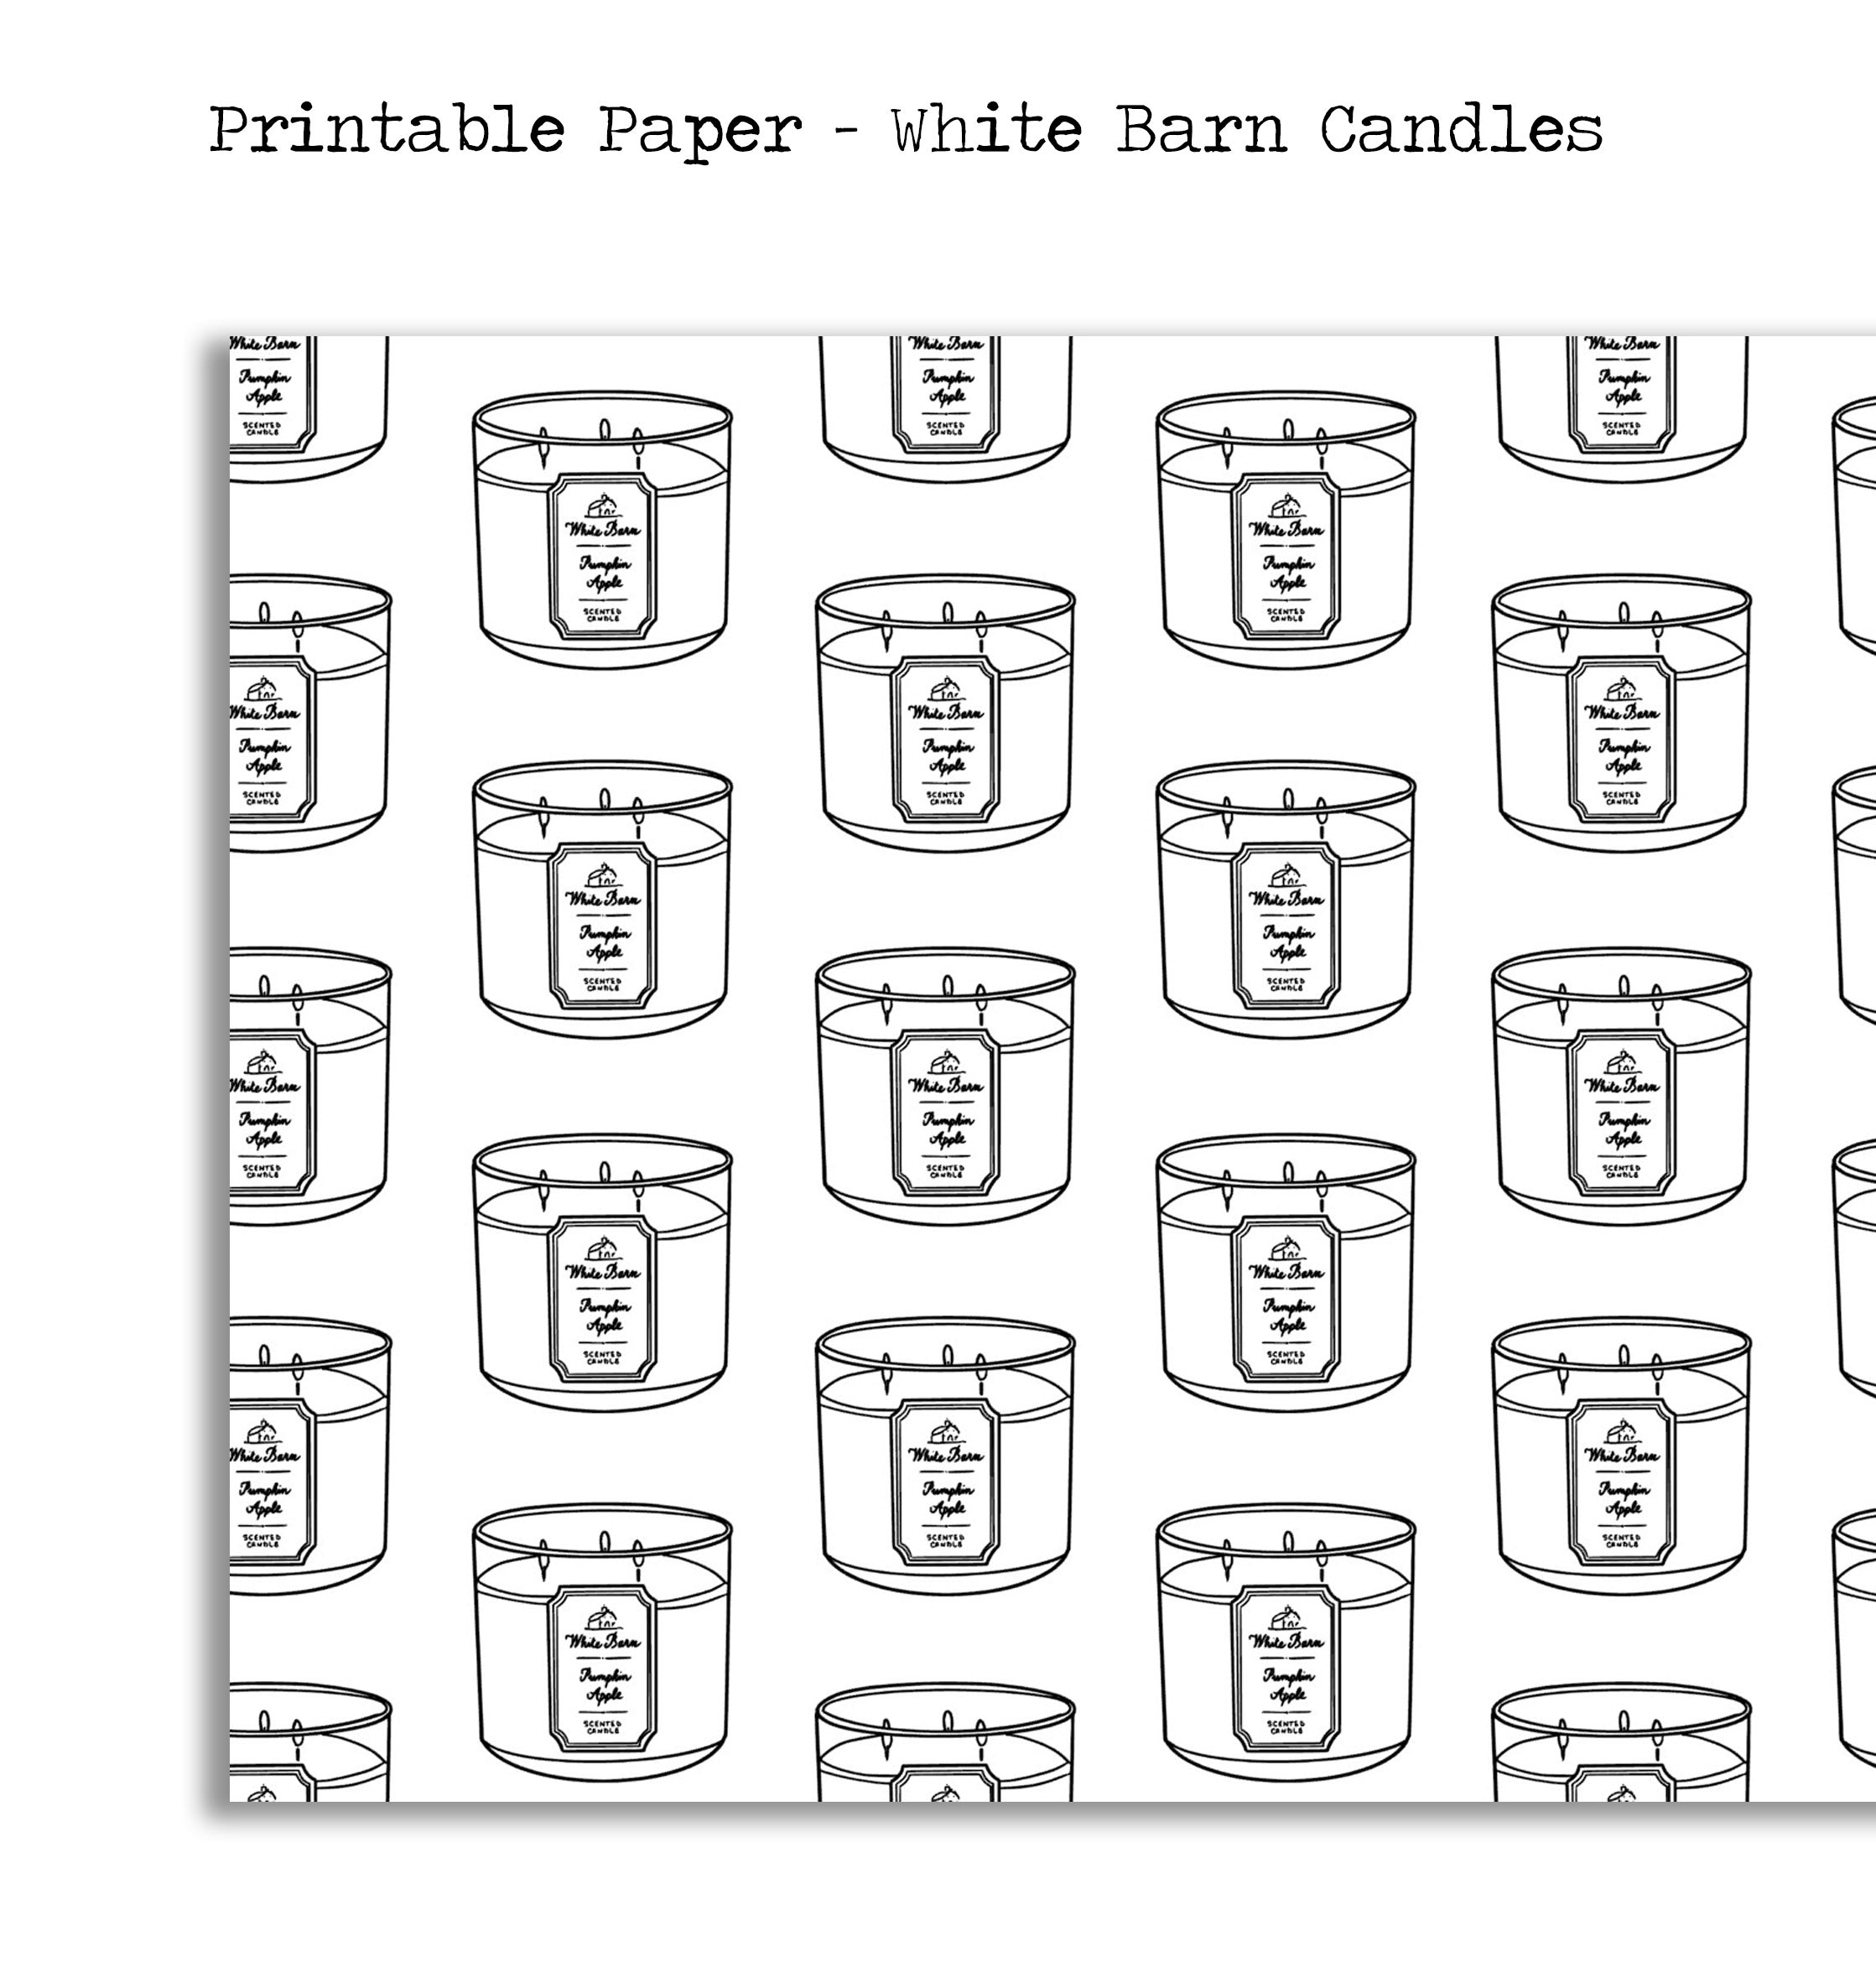 White Barn Candles - Printable Paper